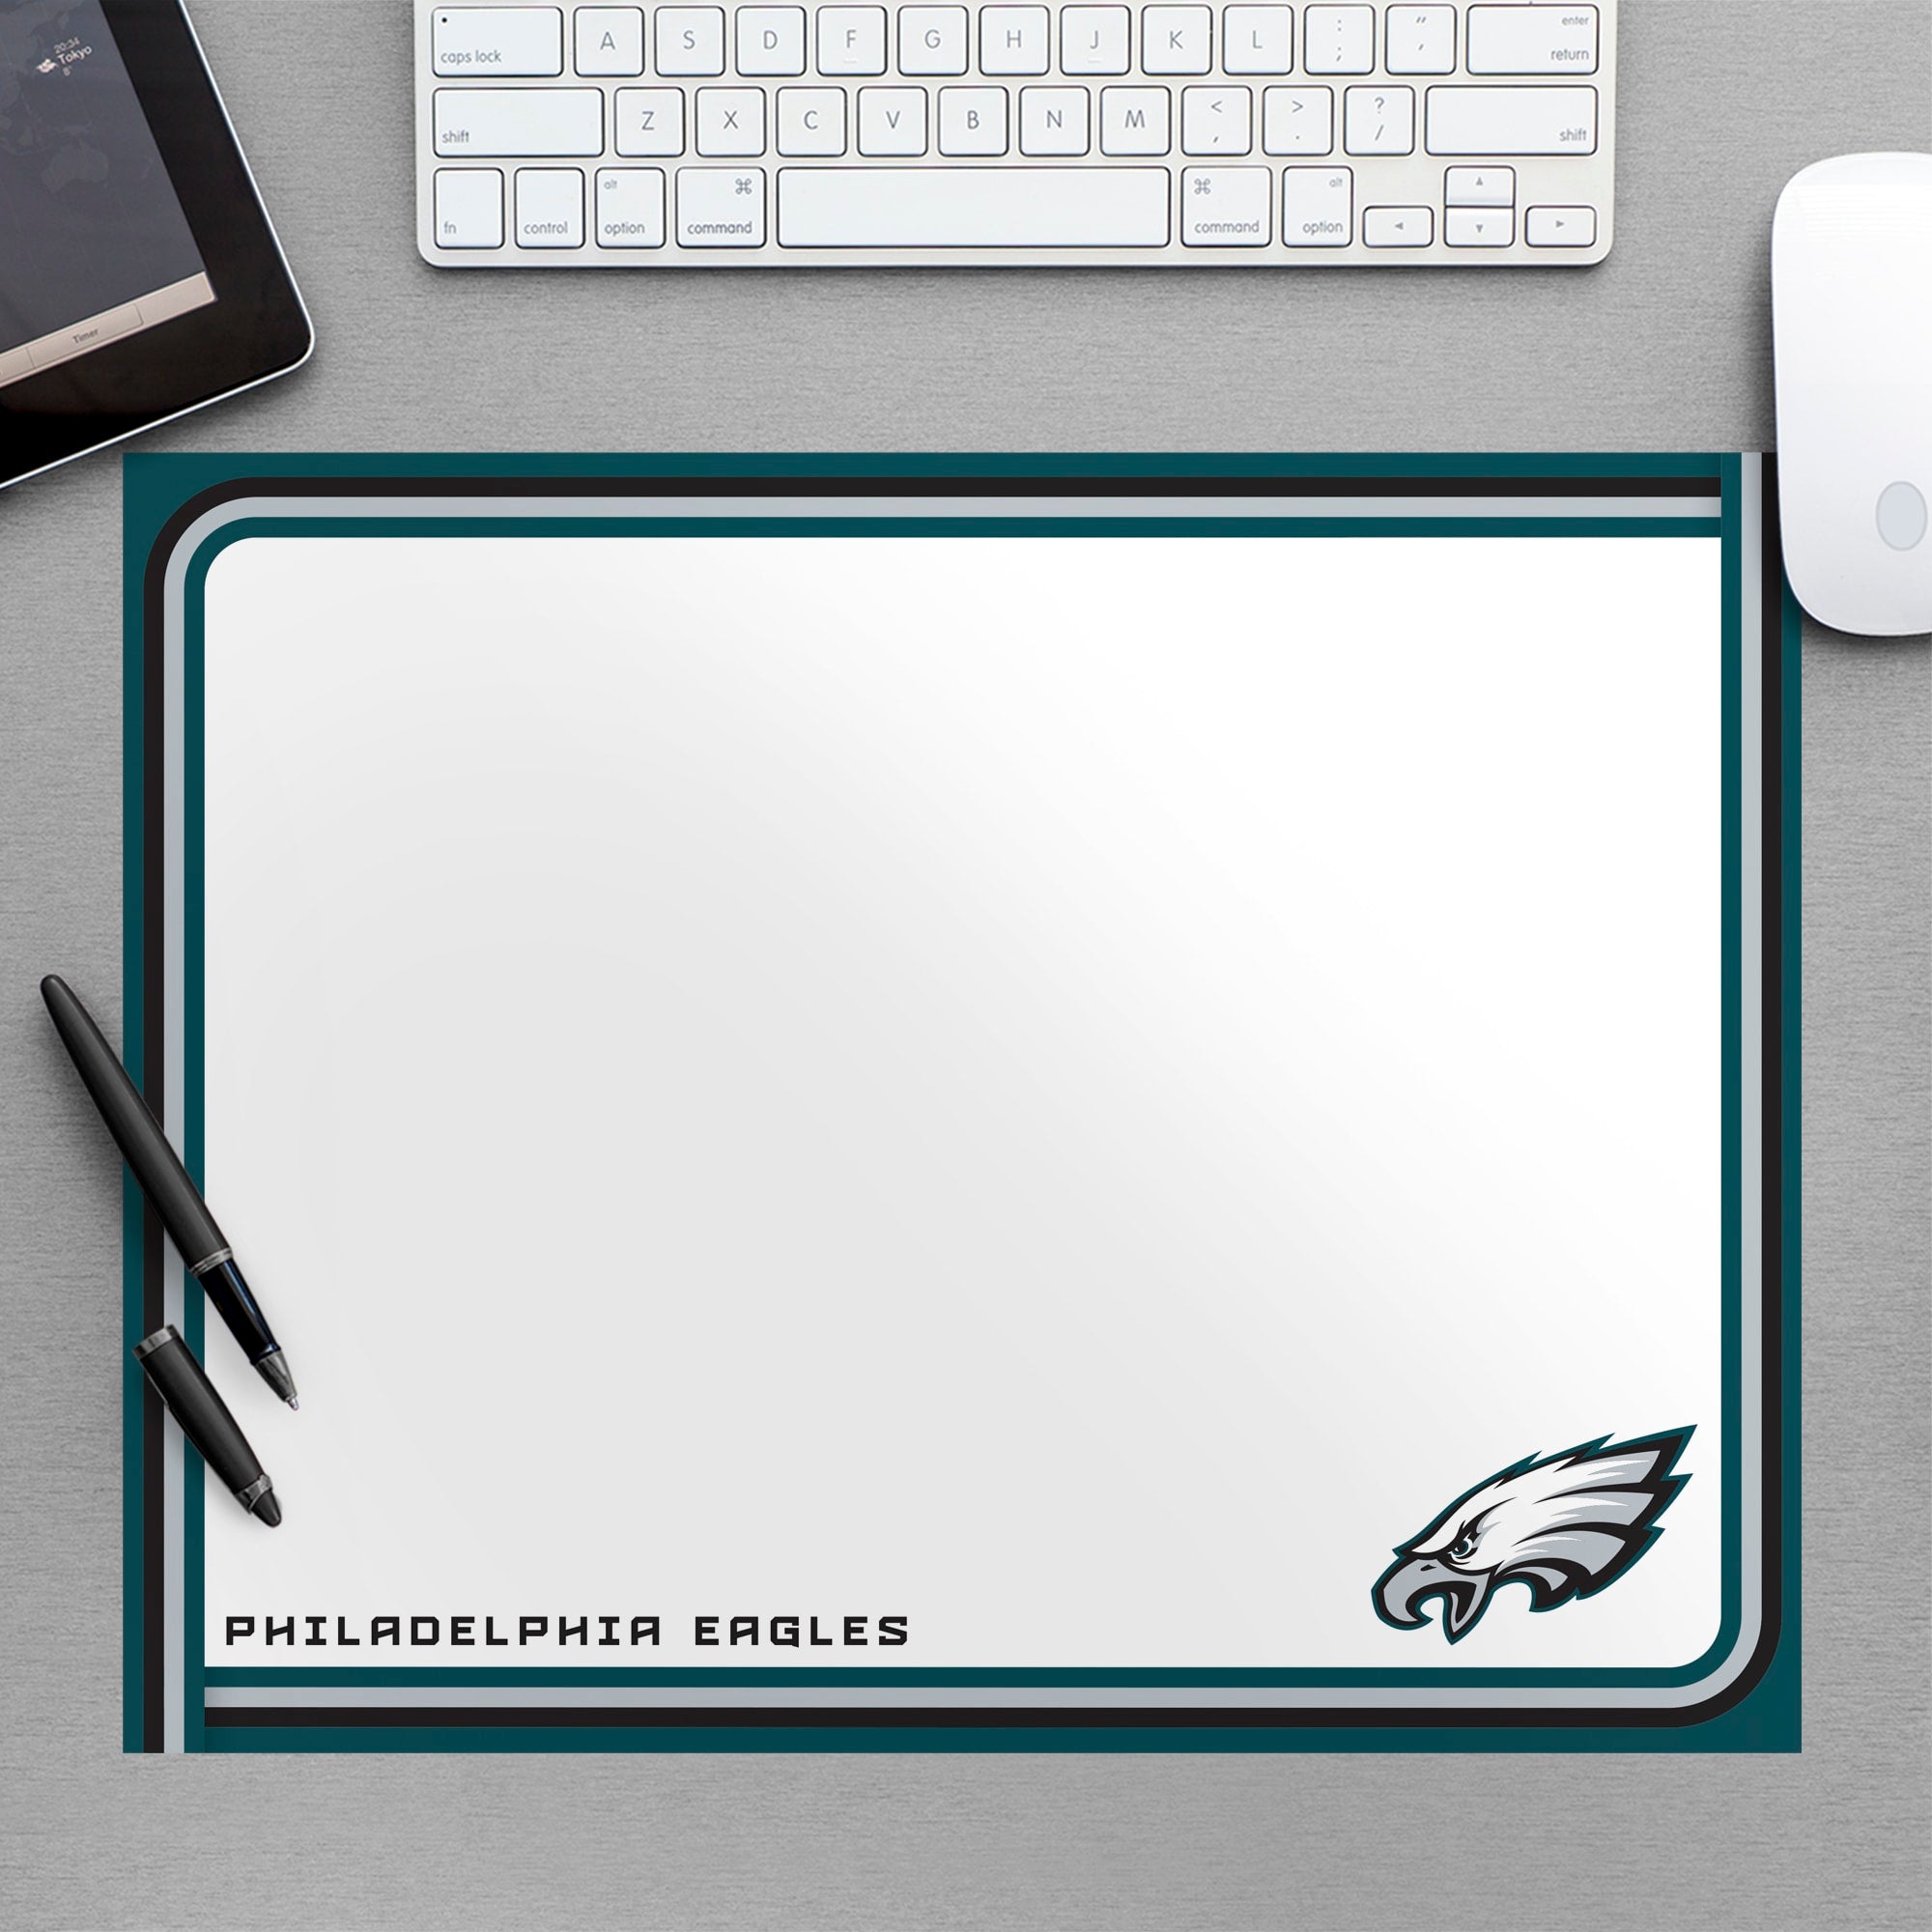 Philadelphia Eagles: Dry Erase Whiteboard - Officially Licensed NFL Removable Wall Decal Large by Fathead | Vinyl